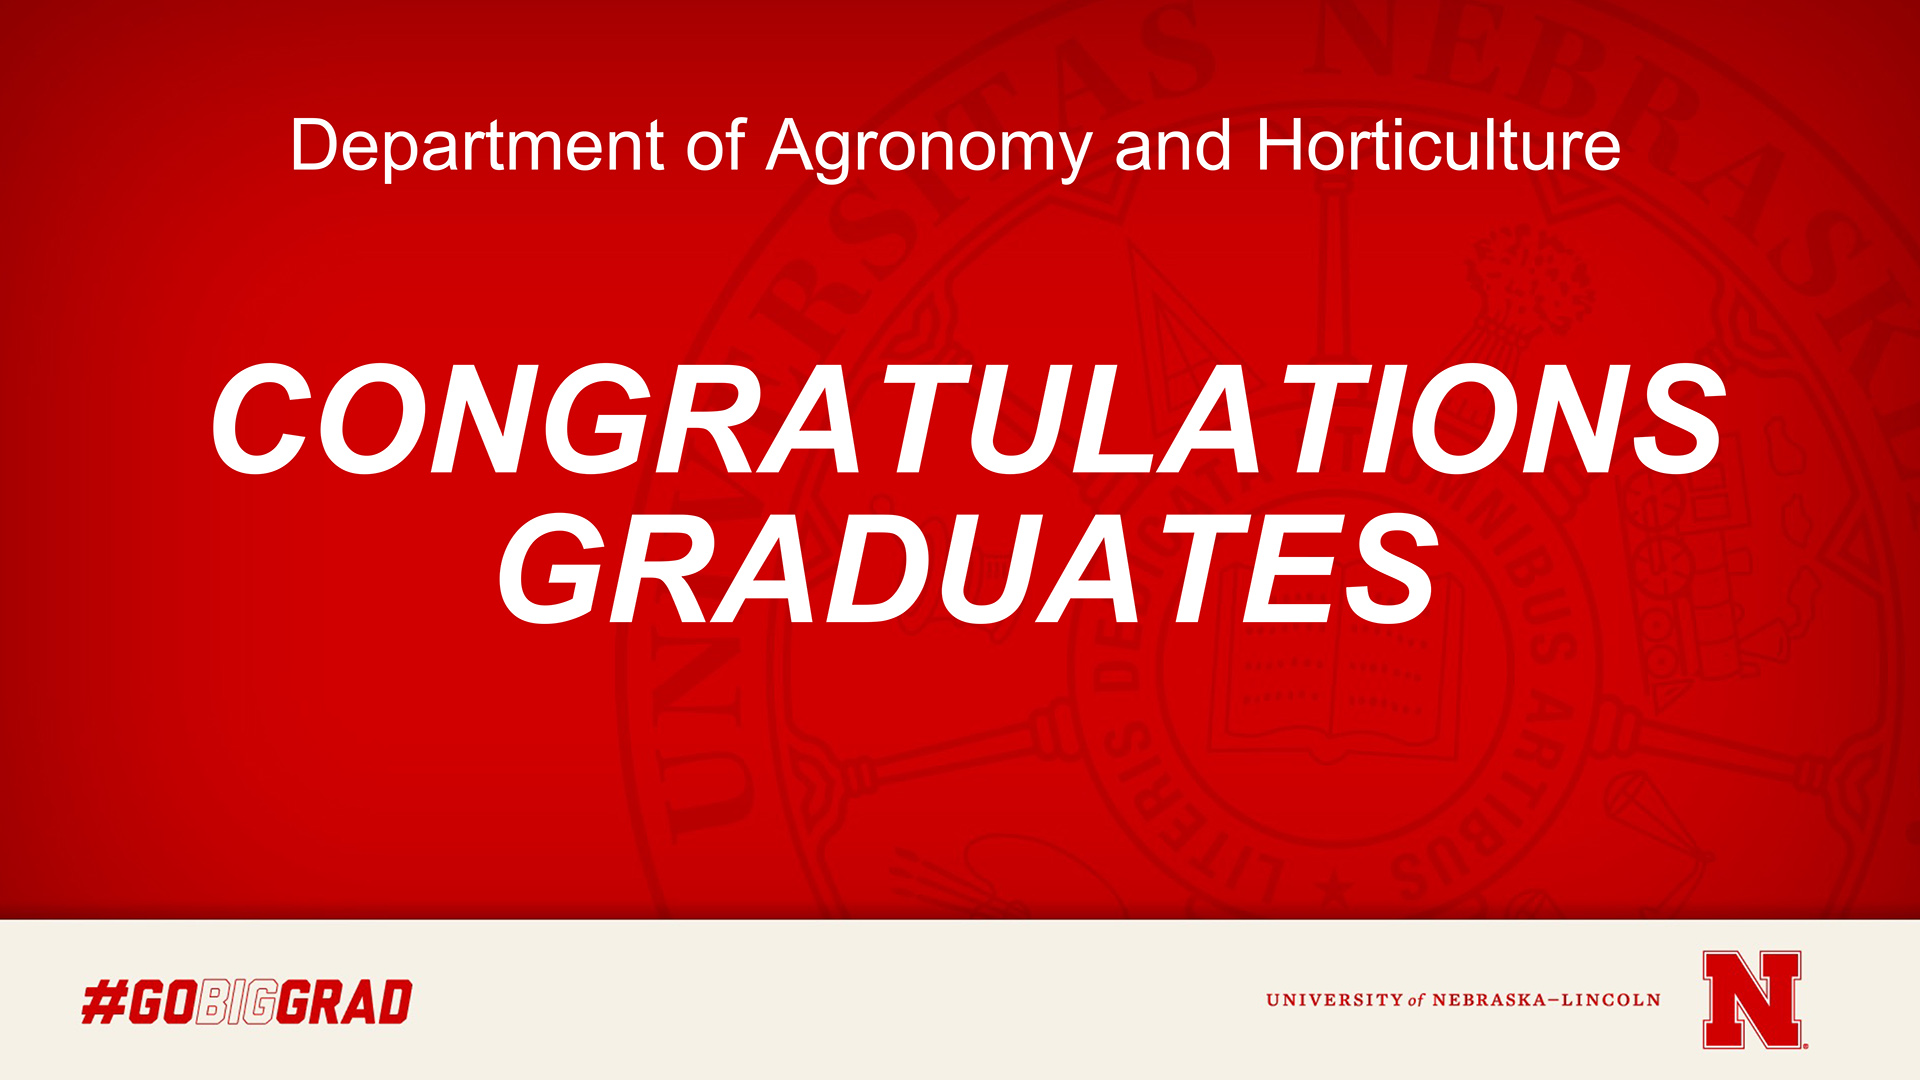 Congratulations to our graduates earning degrees in December.